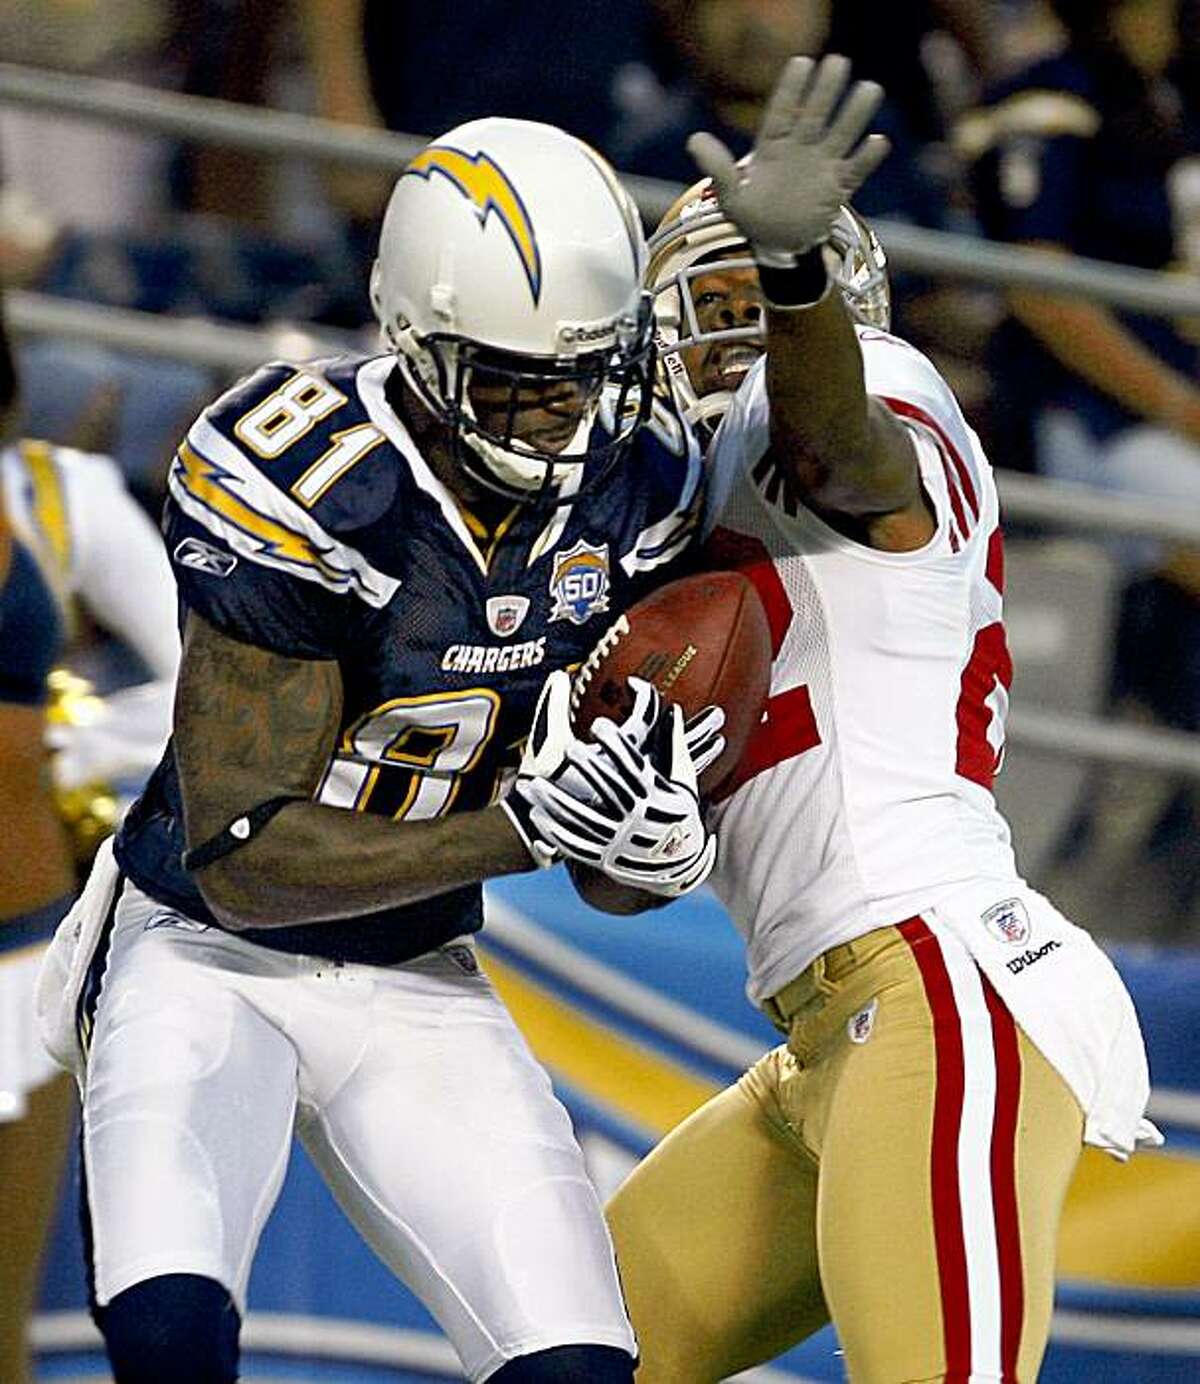 San Diego Chargers wide receiver Kassim Osgood pulls in a 39-yard touchdown pass in front of San Francisco 49ers cornerback Nate Clements during the first quarter of a NFL preseason football game Friday, Sept. 4, 2009 in San Diego. (AP Photo/Lenny Ignelzi)